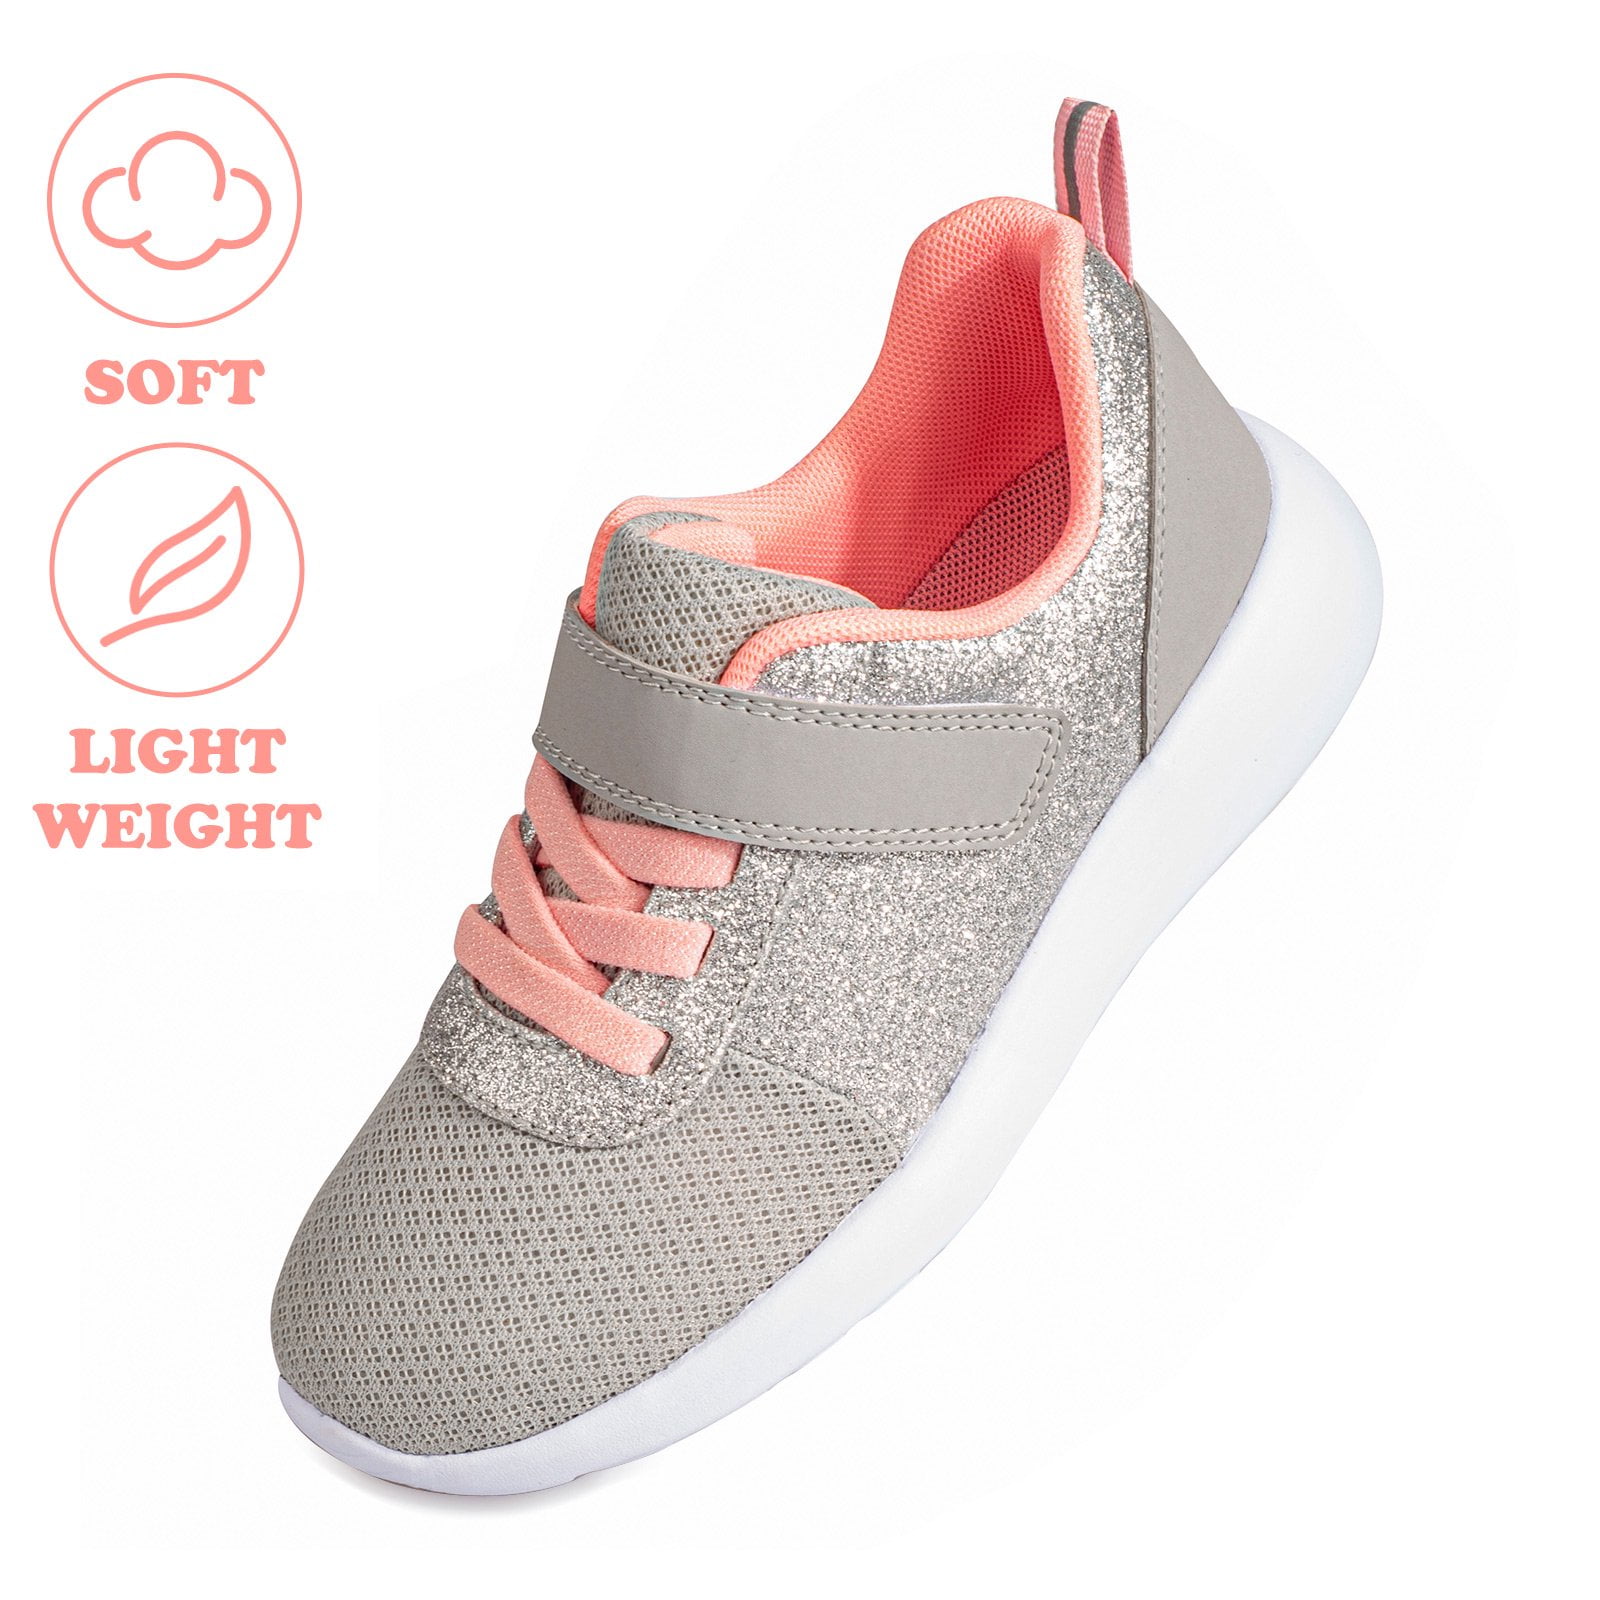 Toddle/Little Kids/Big Kids Harvest Land Girls Sneakers Glitter Fashion Running Shoes Mesh Breathable Hook and Loop Slip-on Tennis Shoes 